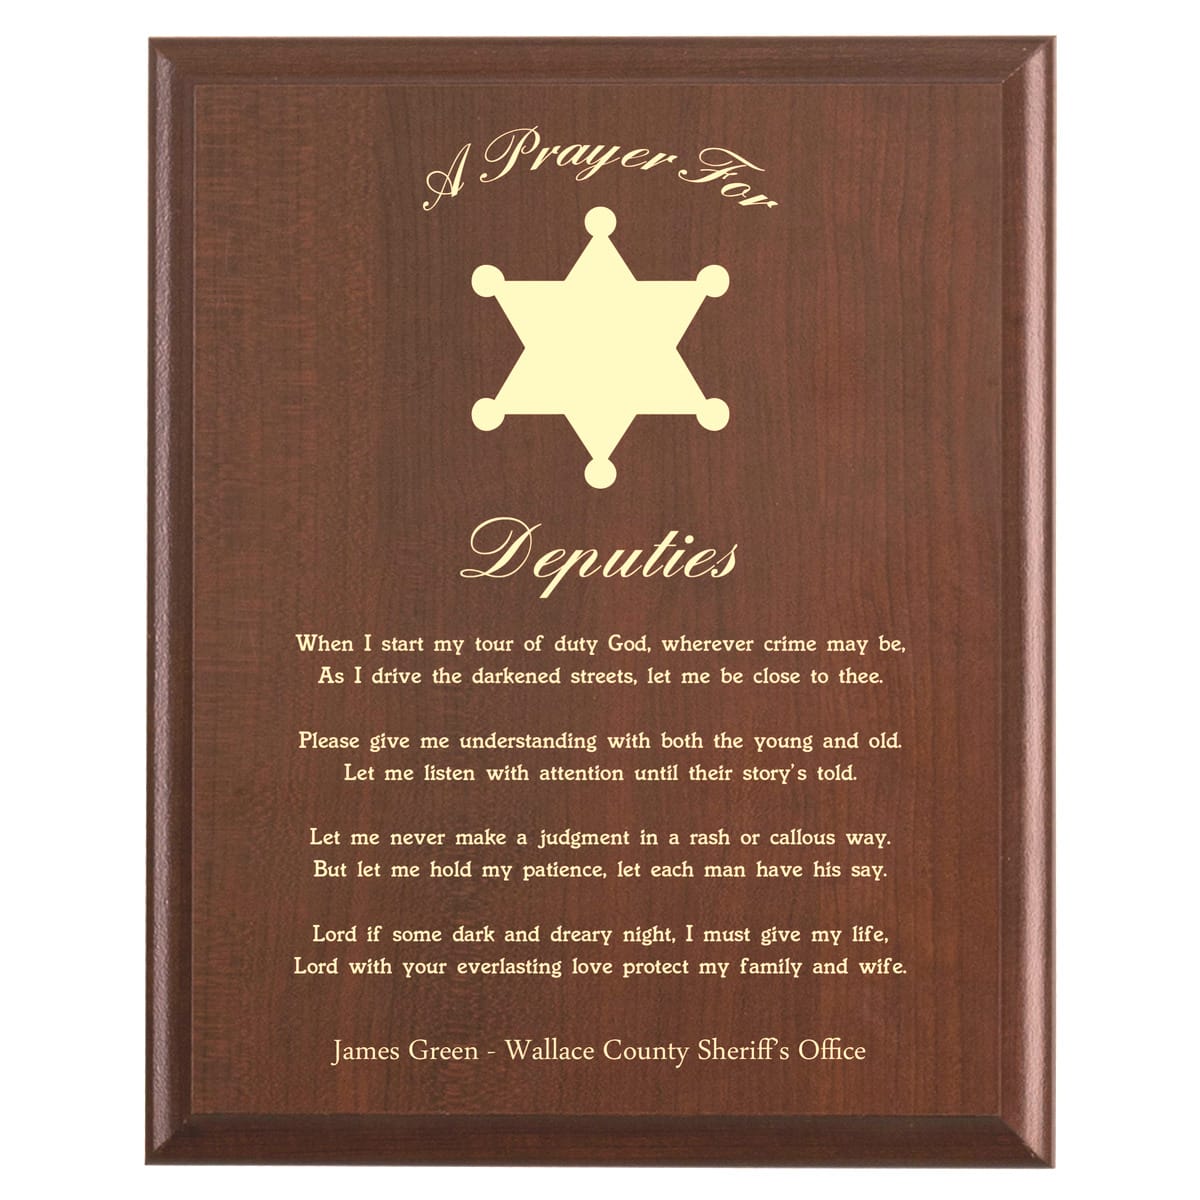 Plaque photo: Deputy Prayer Plaque design with free personalization. Wood style finish with customized text.